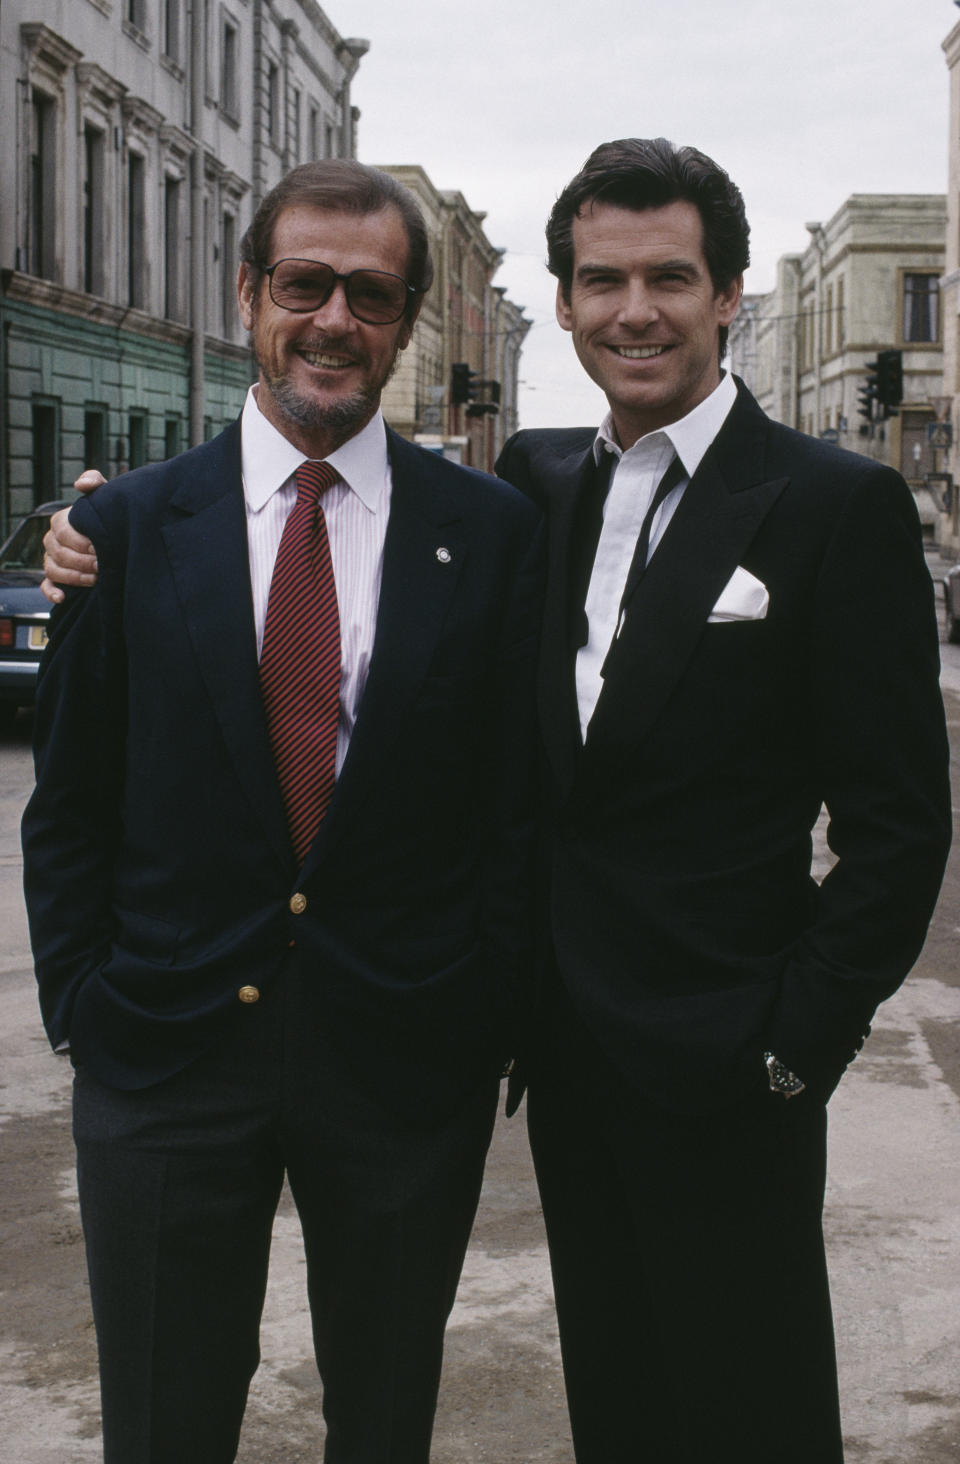 Irish actor Pierce Brosnan poses with Roger Moore, a former incarnation of superspy James Bond, on the set of the film 'GoldenEye', 1995. (Photo by Keith Hamshere/Getty Images)